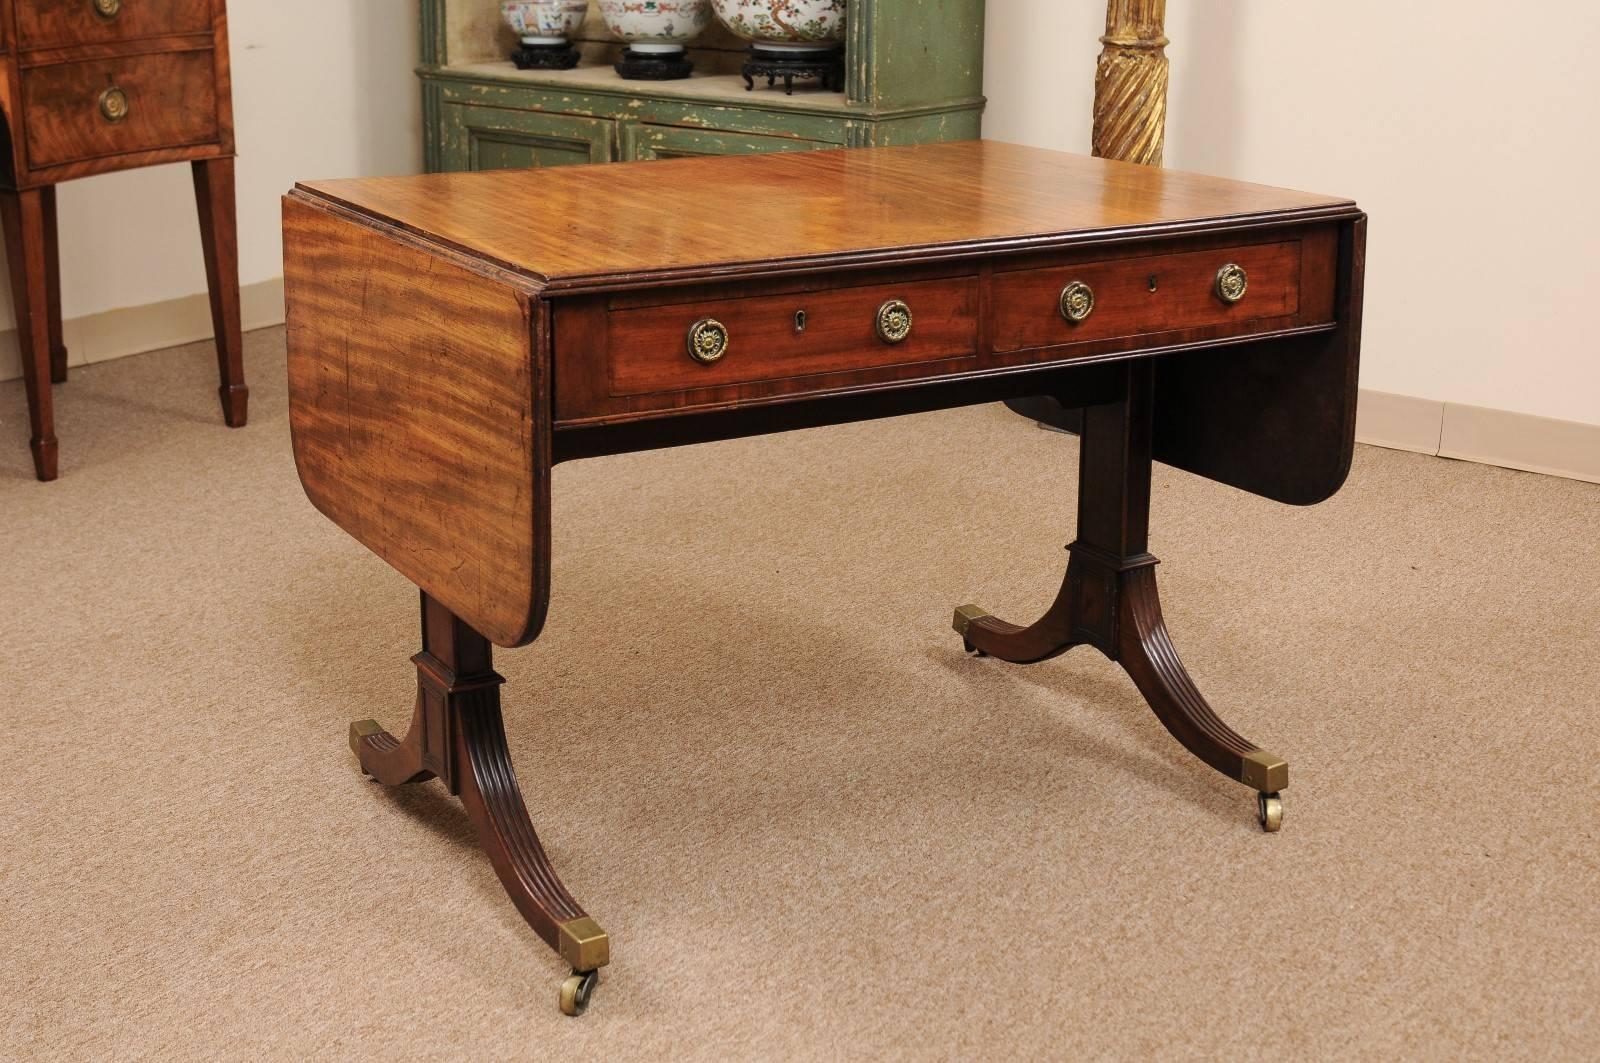 An early 19th century English Regency mahogany sofa table with reeded edge, 2 drawers, drop leaves and reeded splayed legs below ending in brass castor feet. 



  